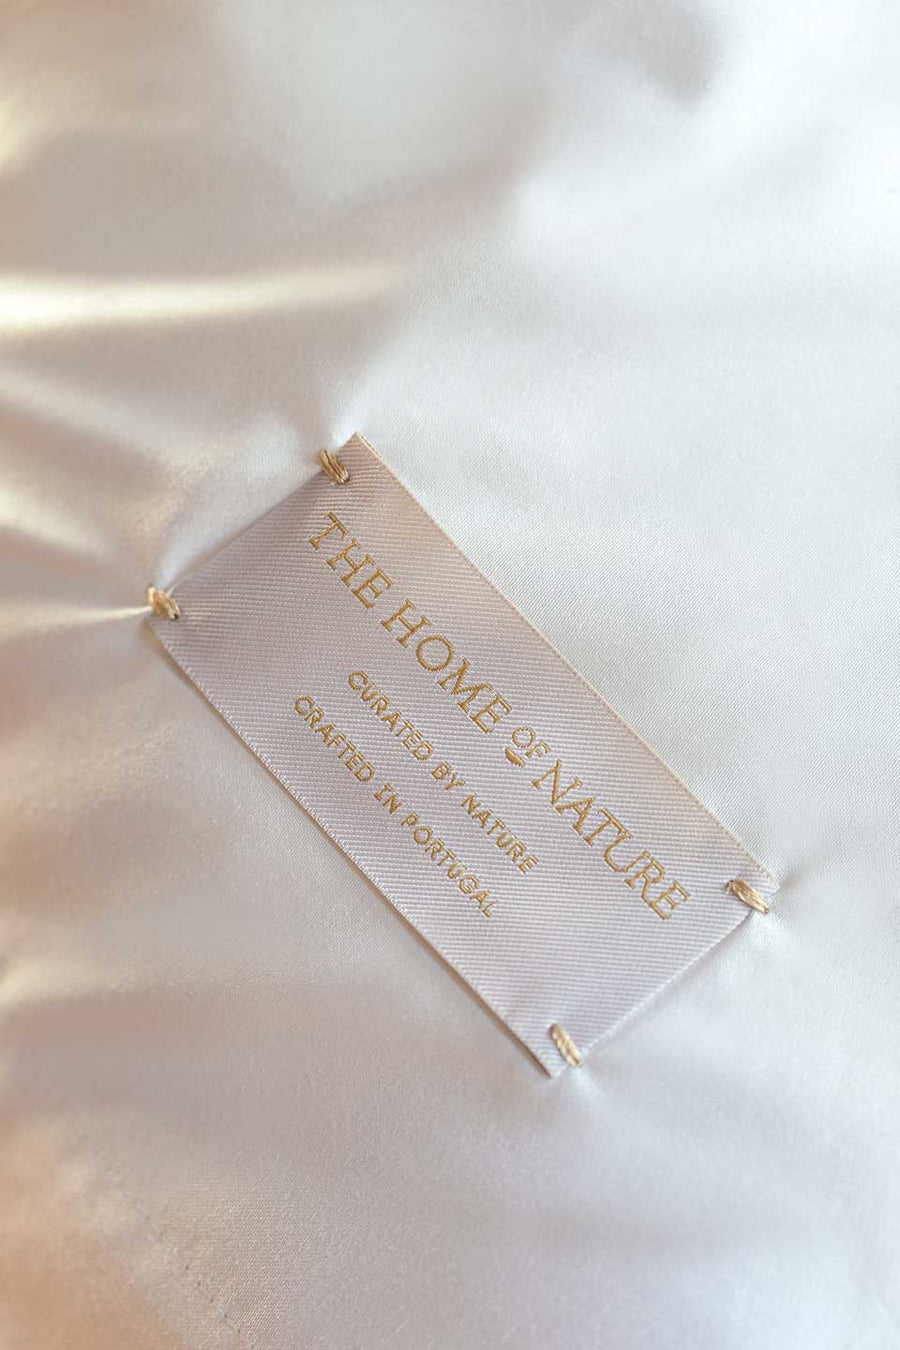 Label from The Nature Home on a white pillowcase in Egyptian Cotton™ Sateen.